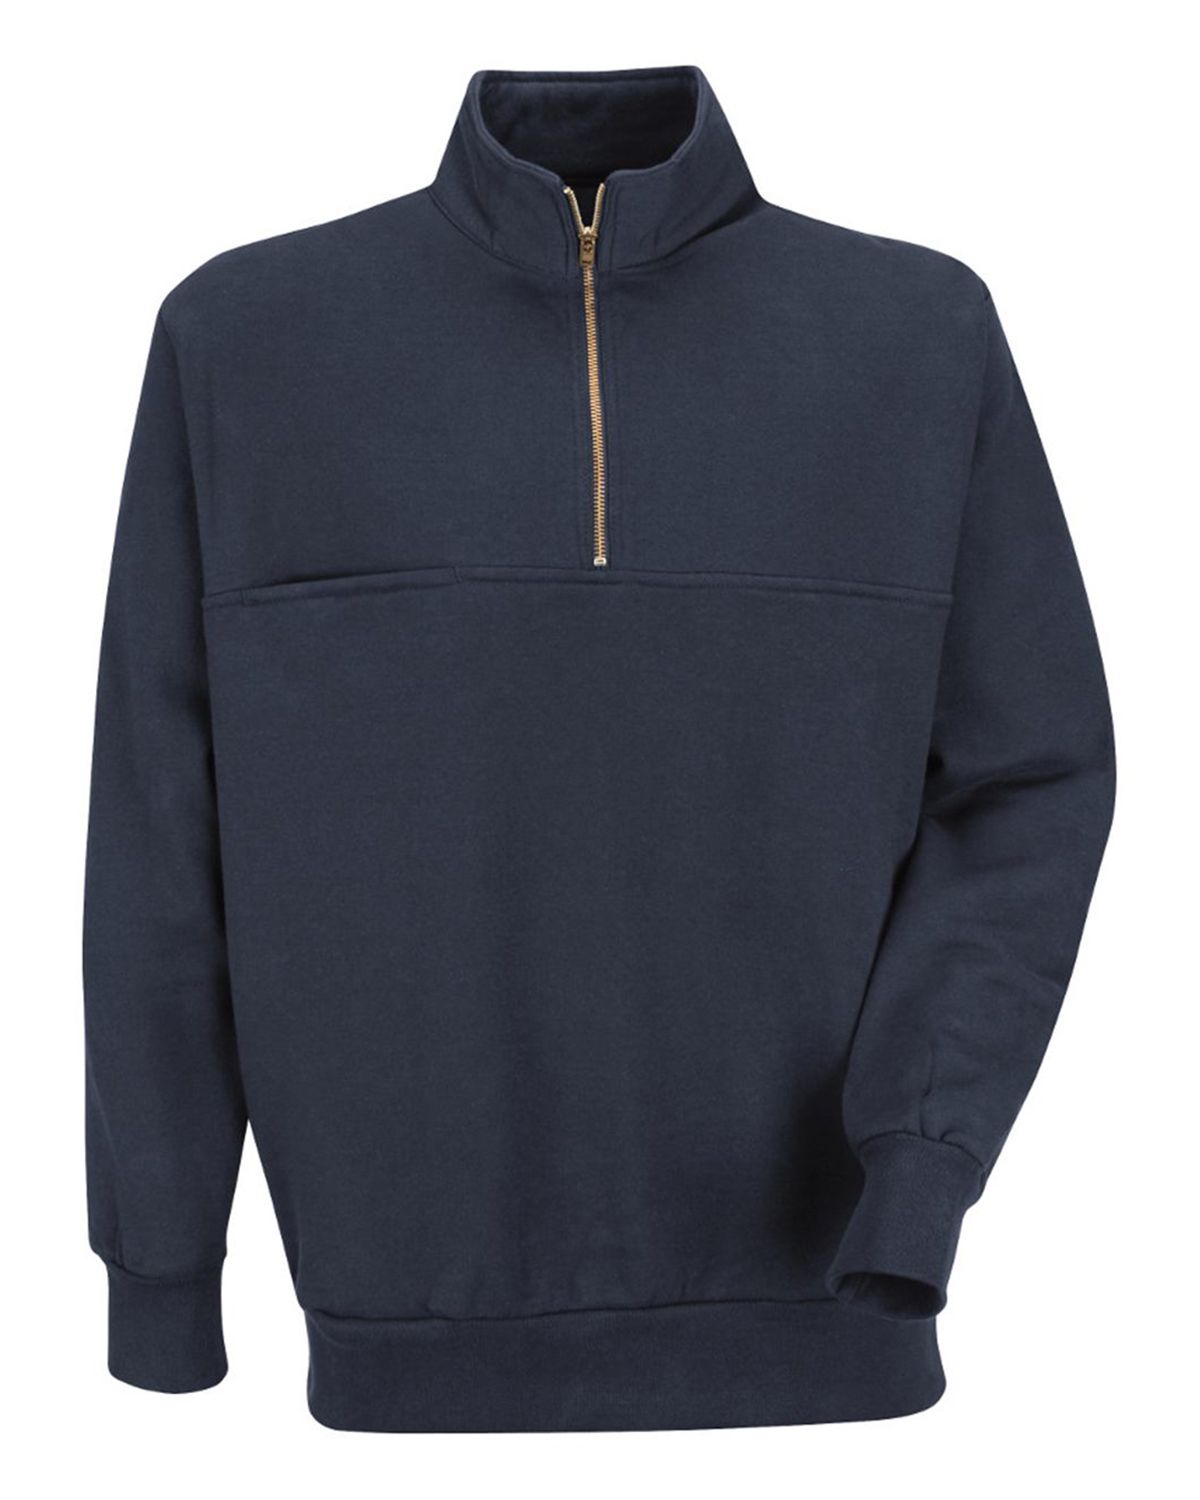 Horace Small HS5122 New Dimension Quarter-Zip | ApparelnBags